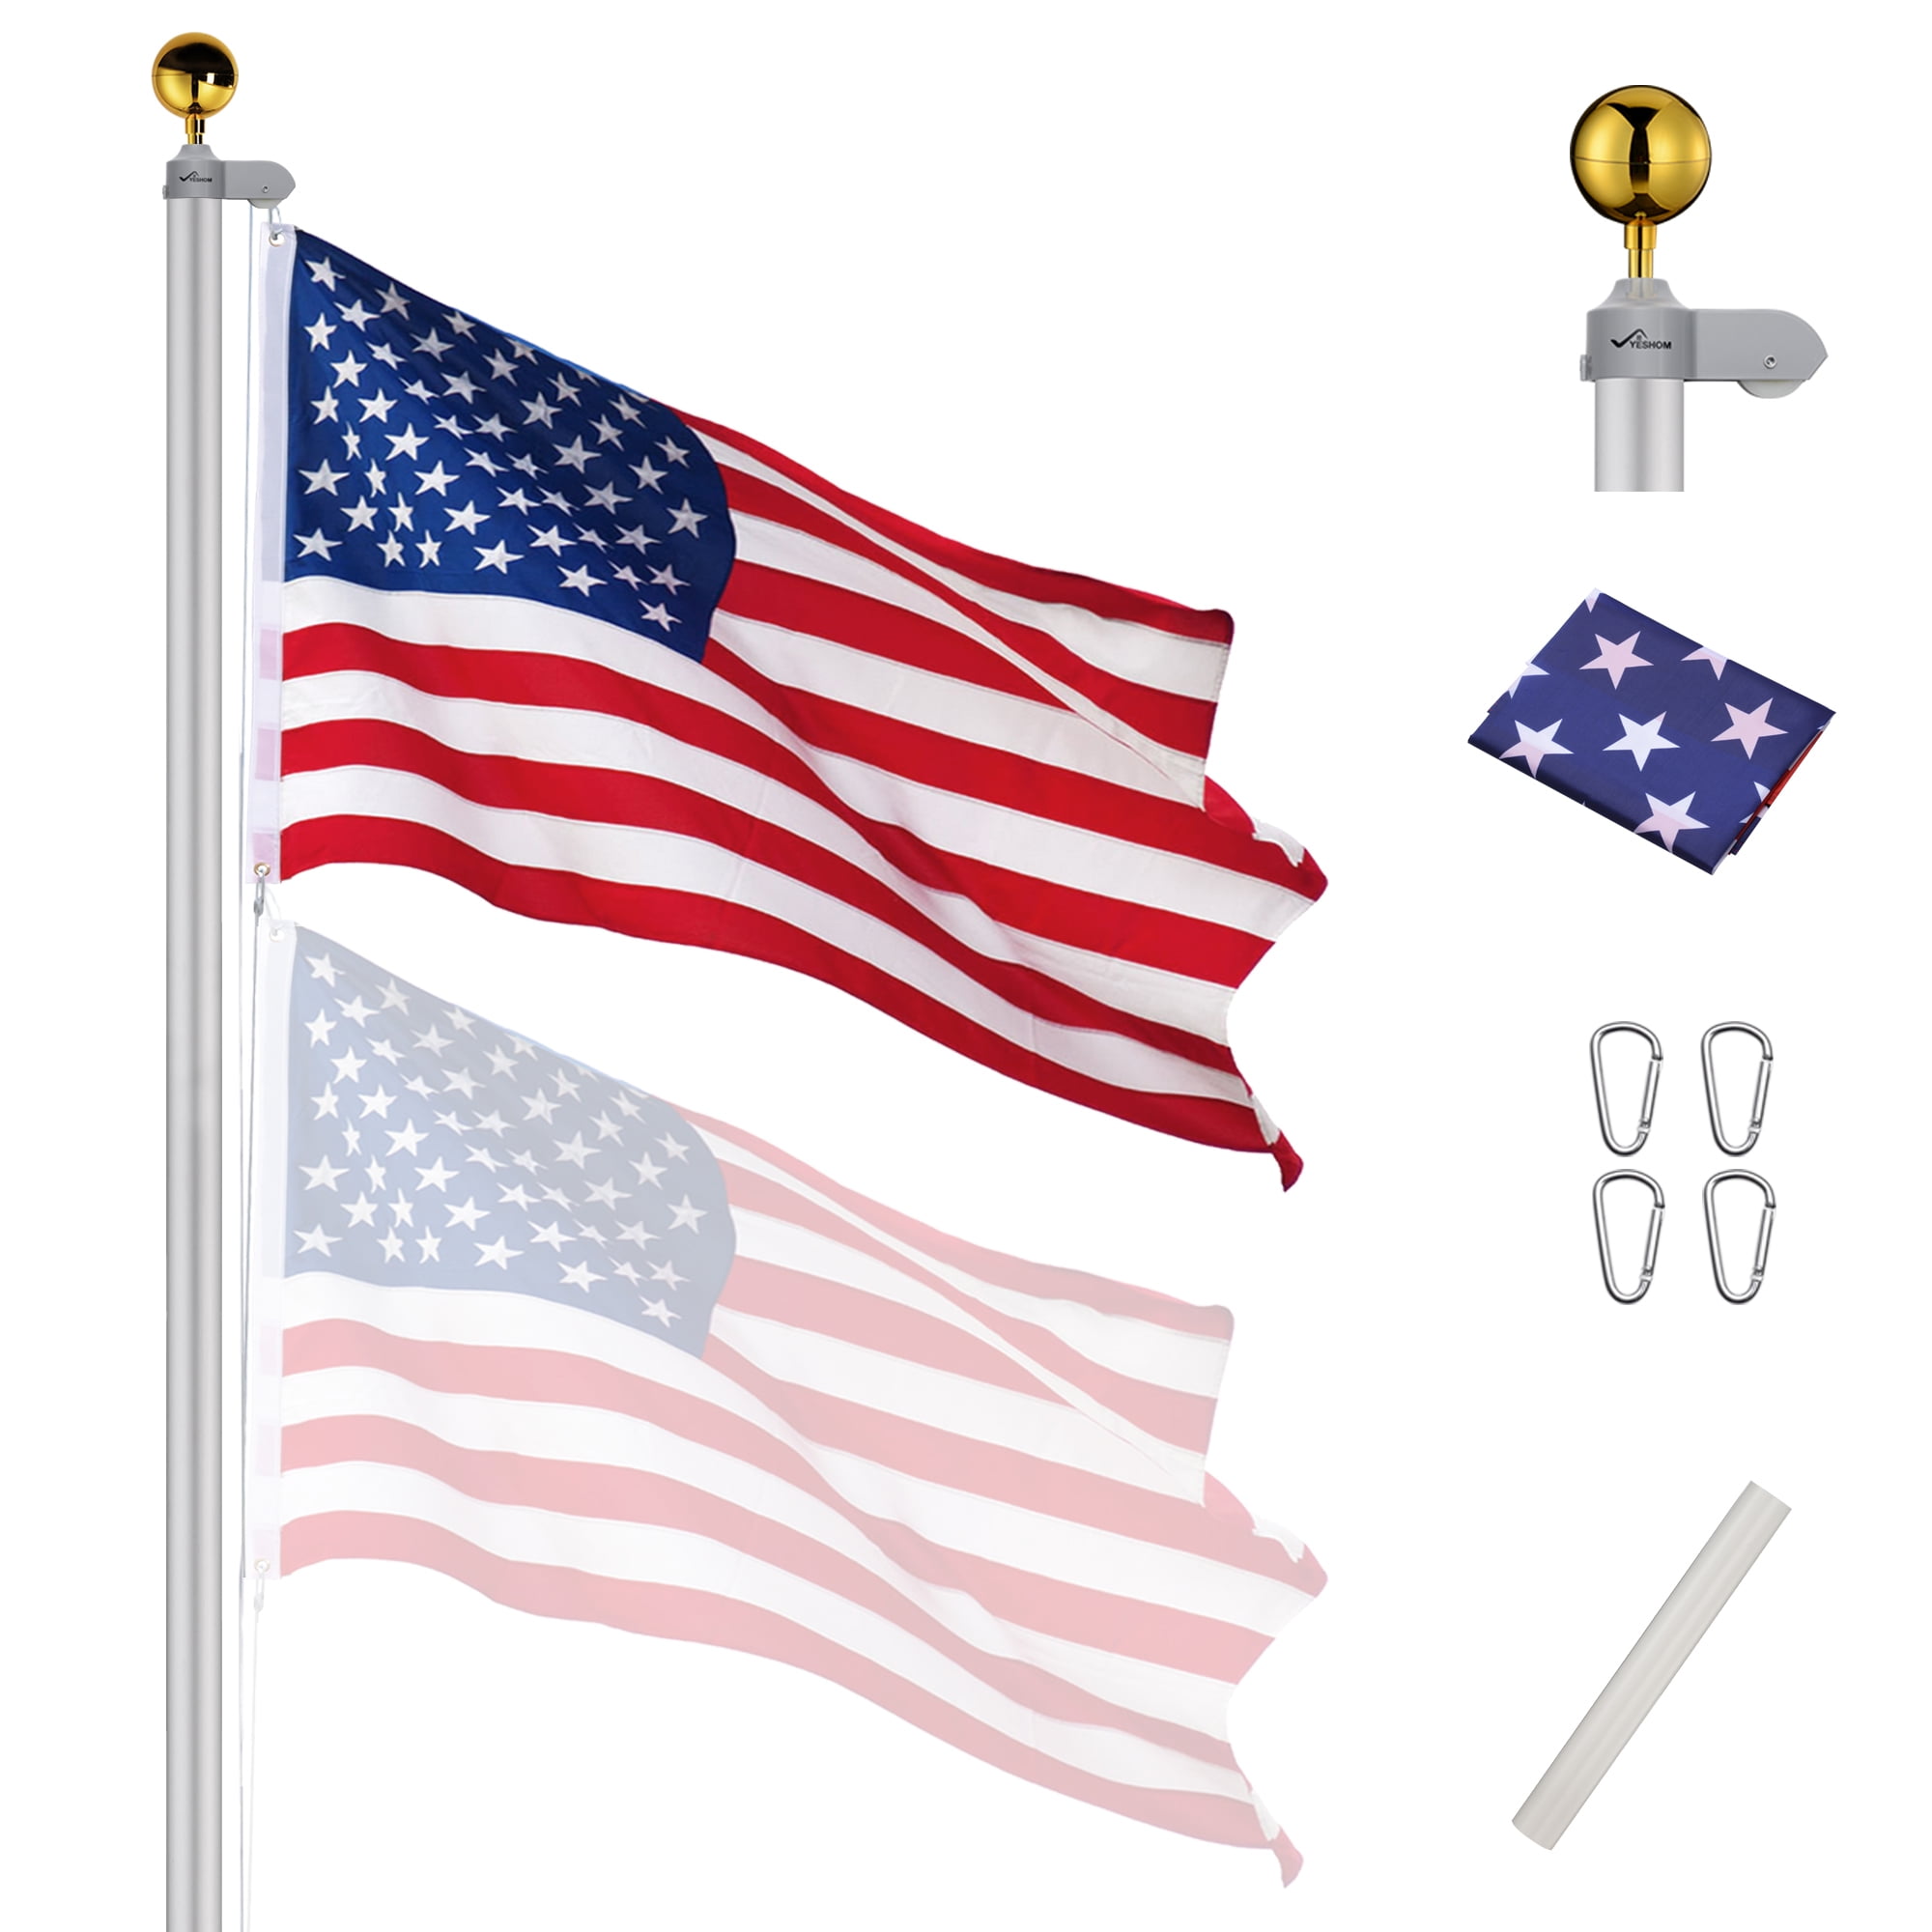 Silver Heavy Duty 16 Gauge Aluminum US Telescoping Flagpole Kit Fly 2 Flags with Golden Ball Topper for Outdoor Residential or Commercial A-ONE 20FT Extra Thick Telescopic American Flag Pole 